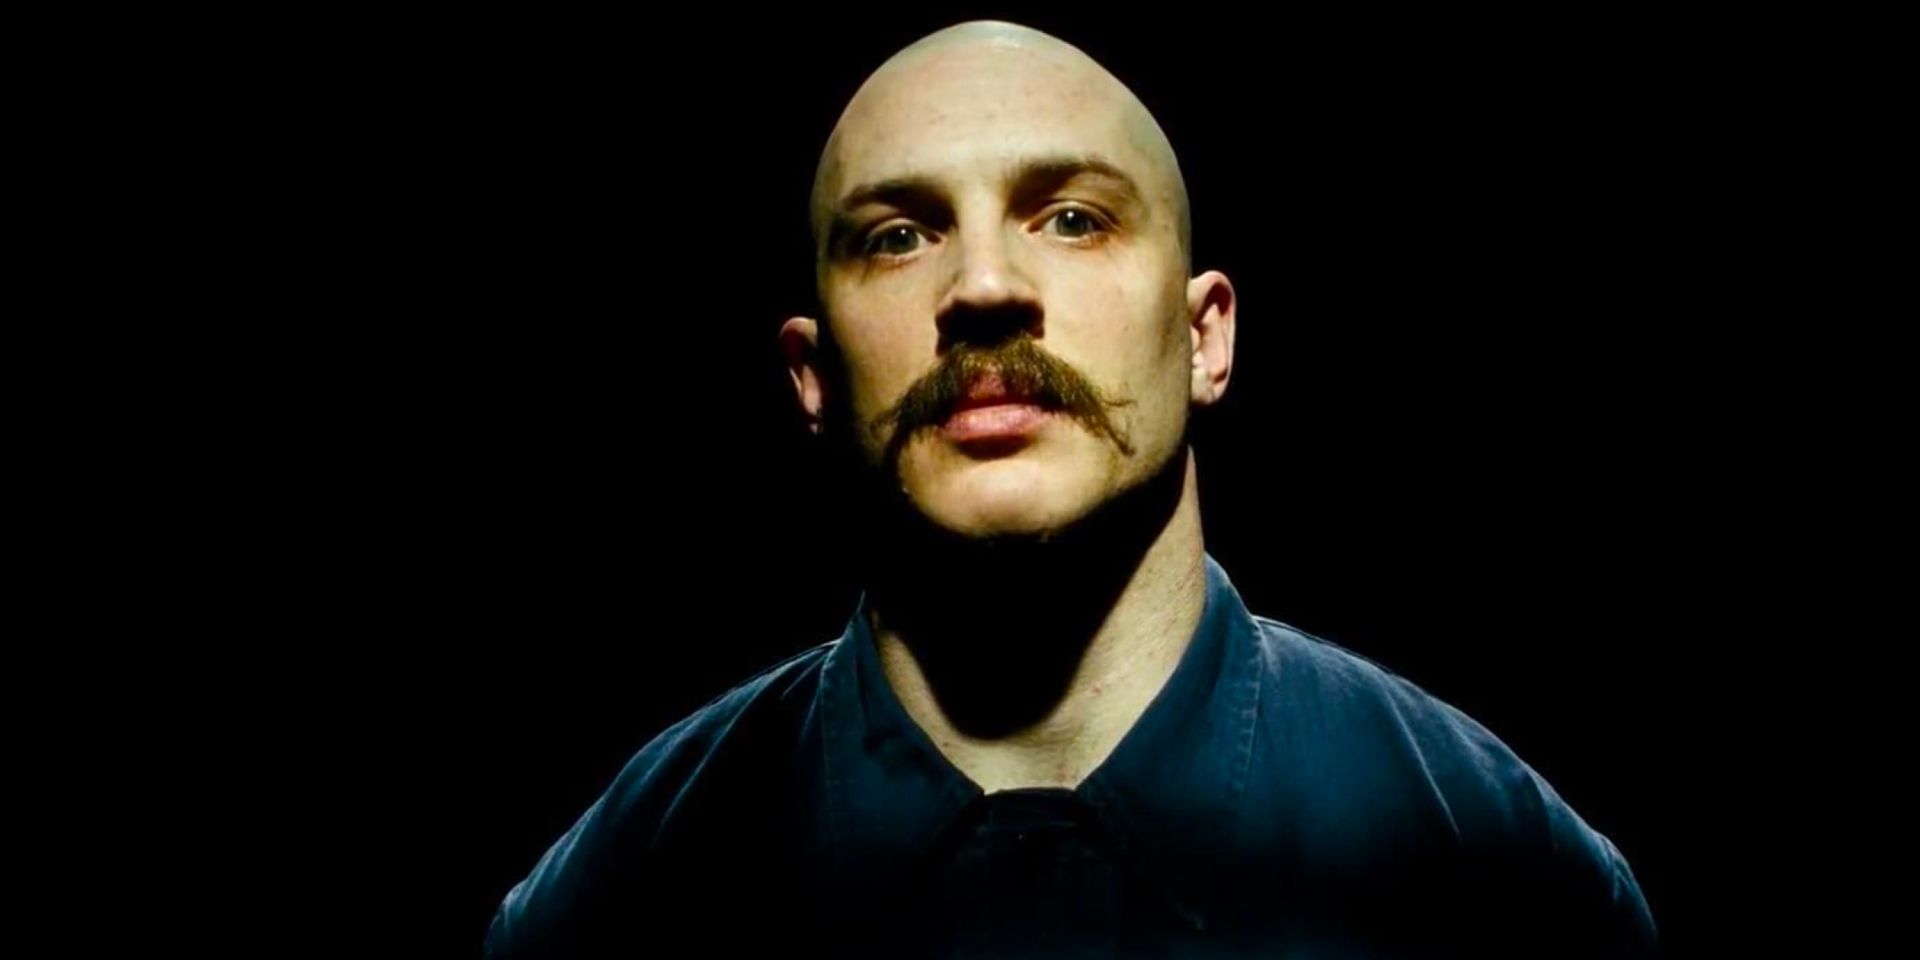 Michael Peterson aka Charles Bronson (Tom Hardy) stands in a spotlight in an otherwise blackened room looking down the barrel of the camera.